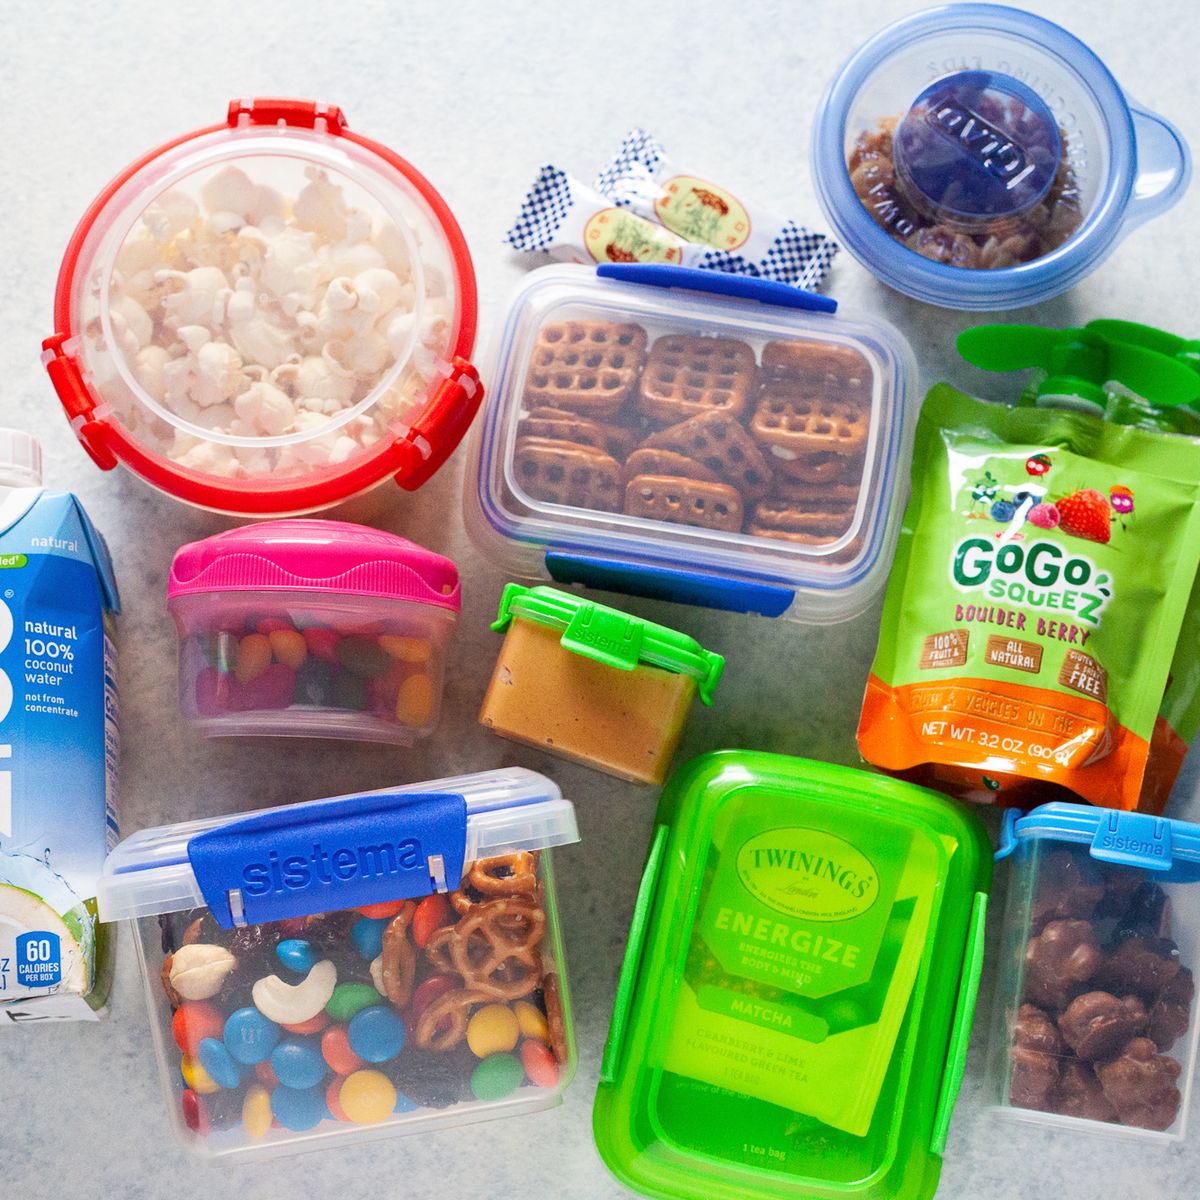 https://hips.hearstapps.com/thepioneerwoman/wp-content/uploads/2019/12/How-to-Pack-Travel-Snacks-01.jpg?crop=0.667xw:1xh;center,top&resize=1200:*